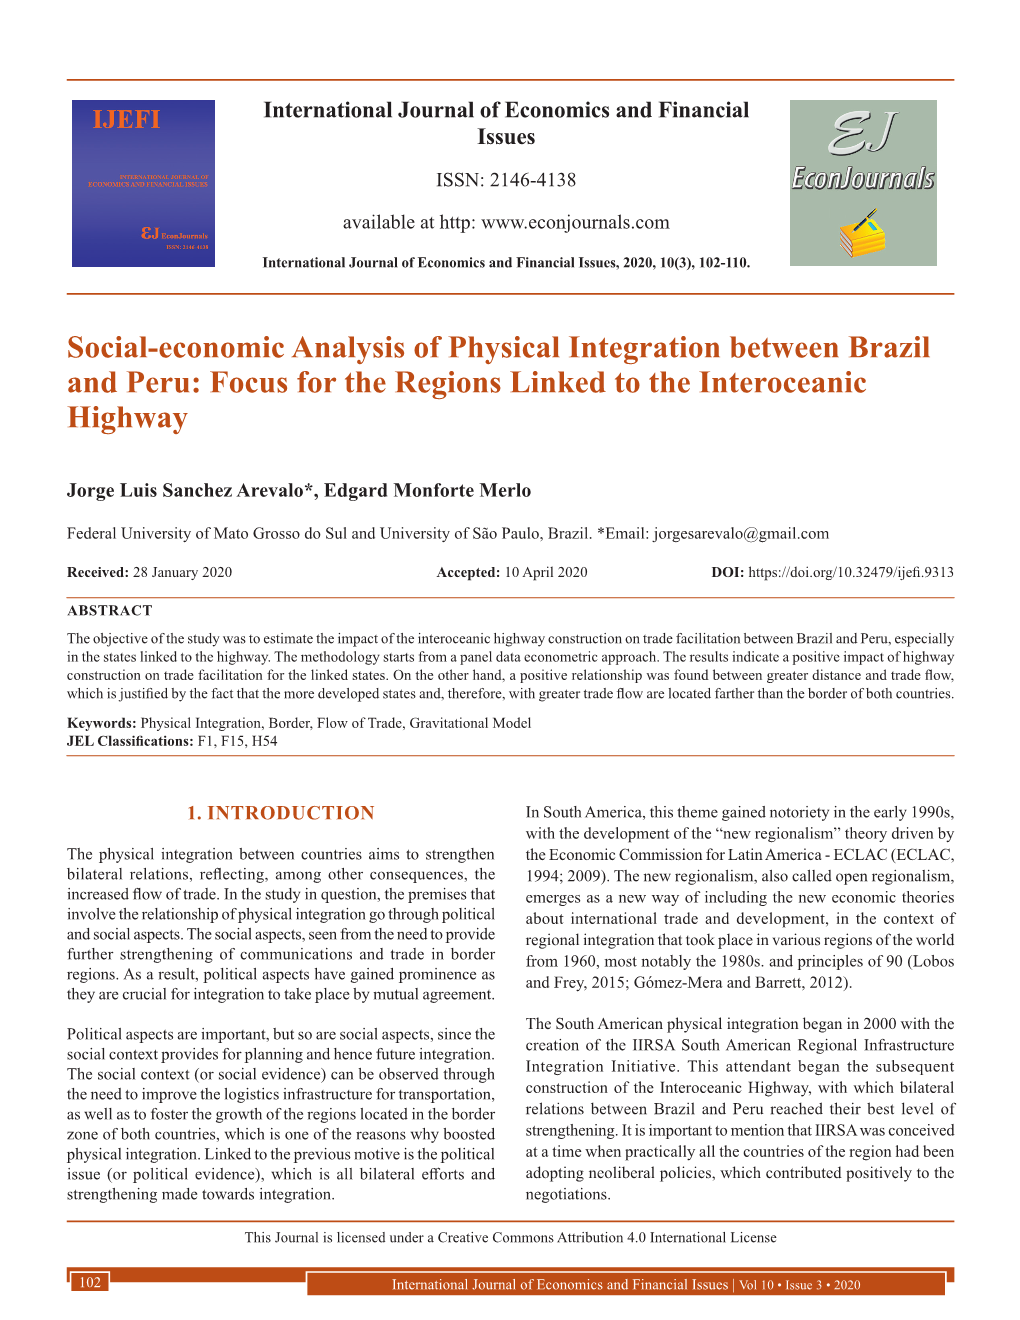 Social-Economic Analysis of Physical Integration Between Brazil and Peru: Focus for the Regions Linked to the Interoceanic Highway